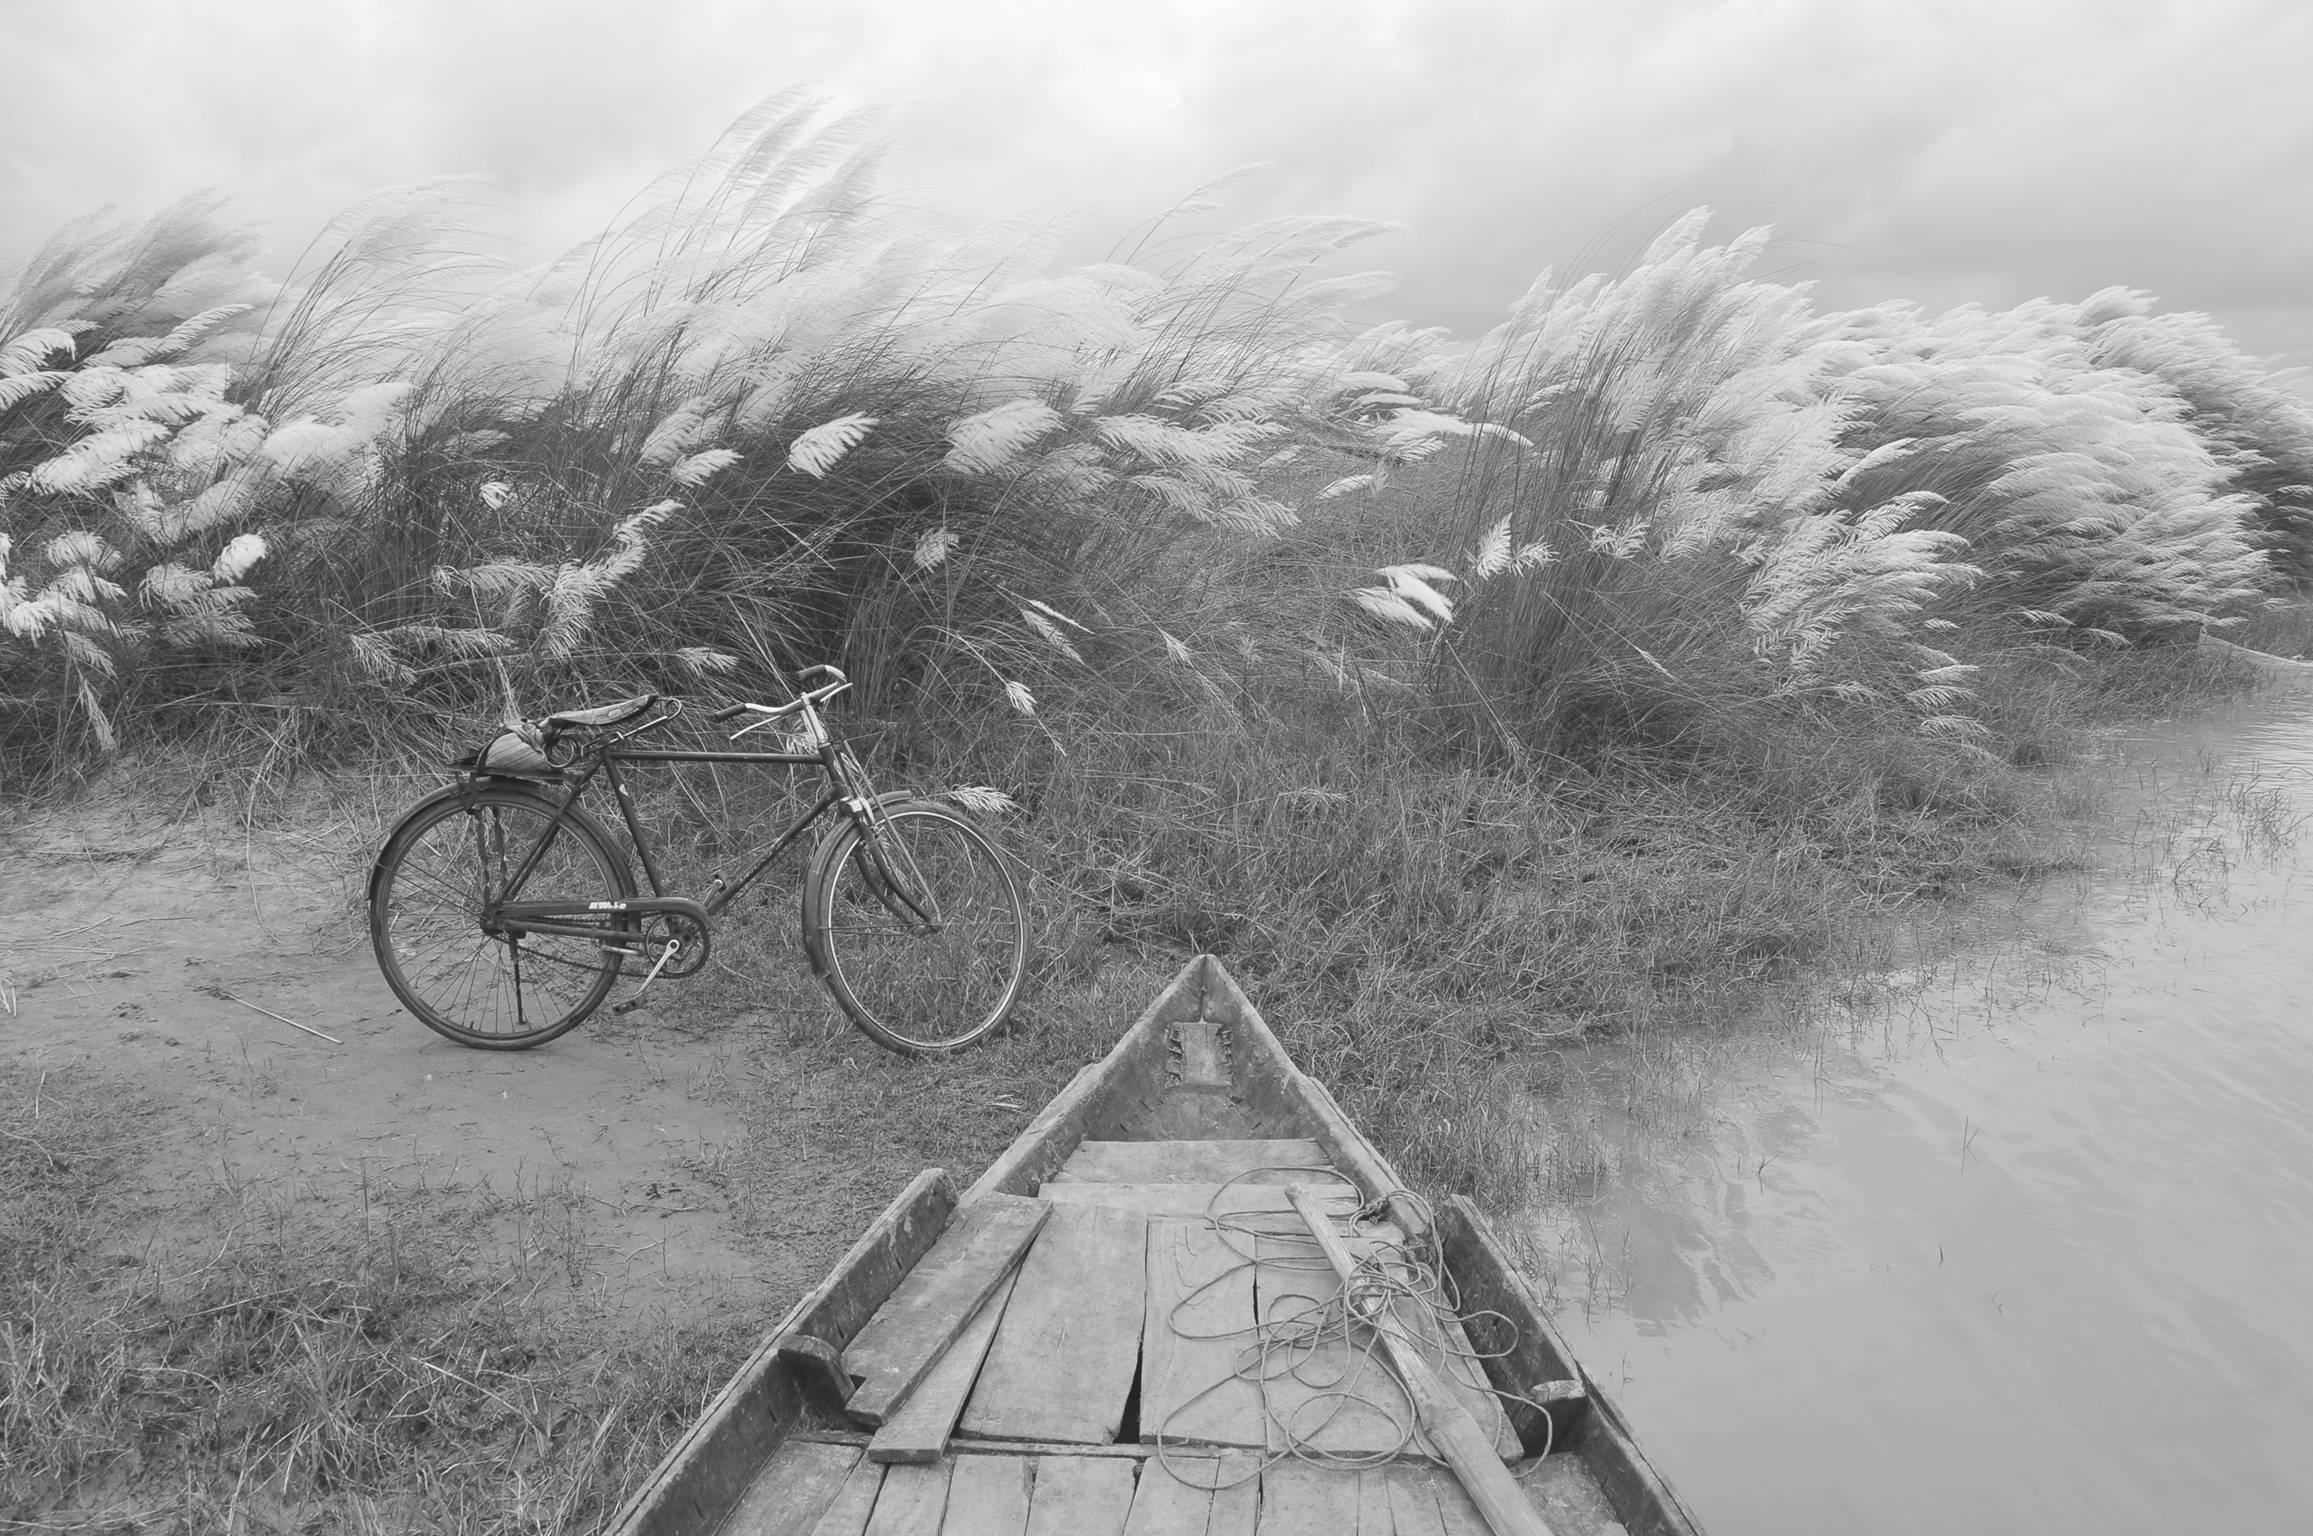 Rural Scenery, Kans Grass, Boat, Bicycle, Black & White Photography "In Stock"